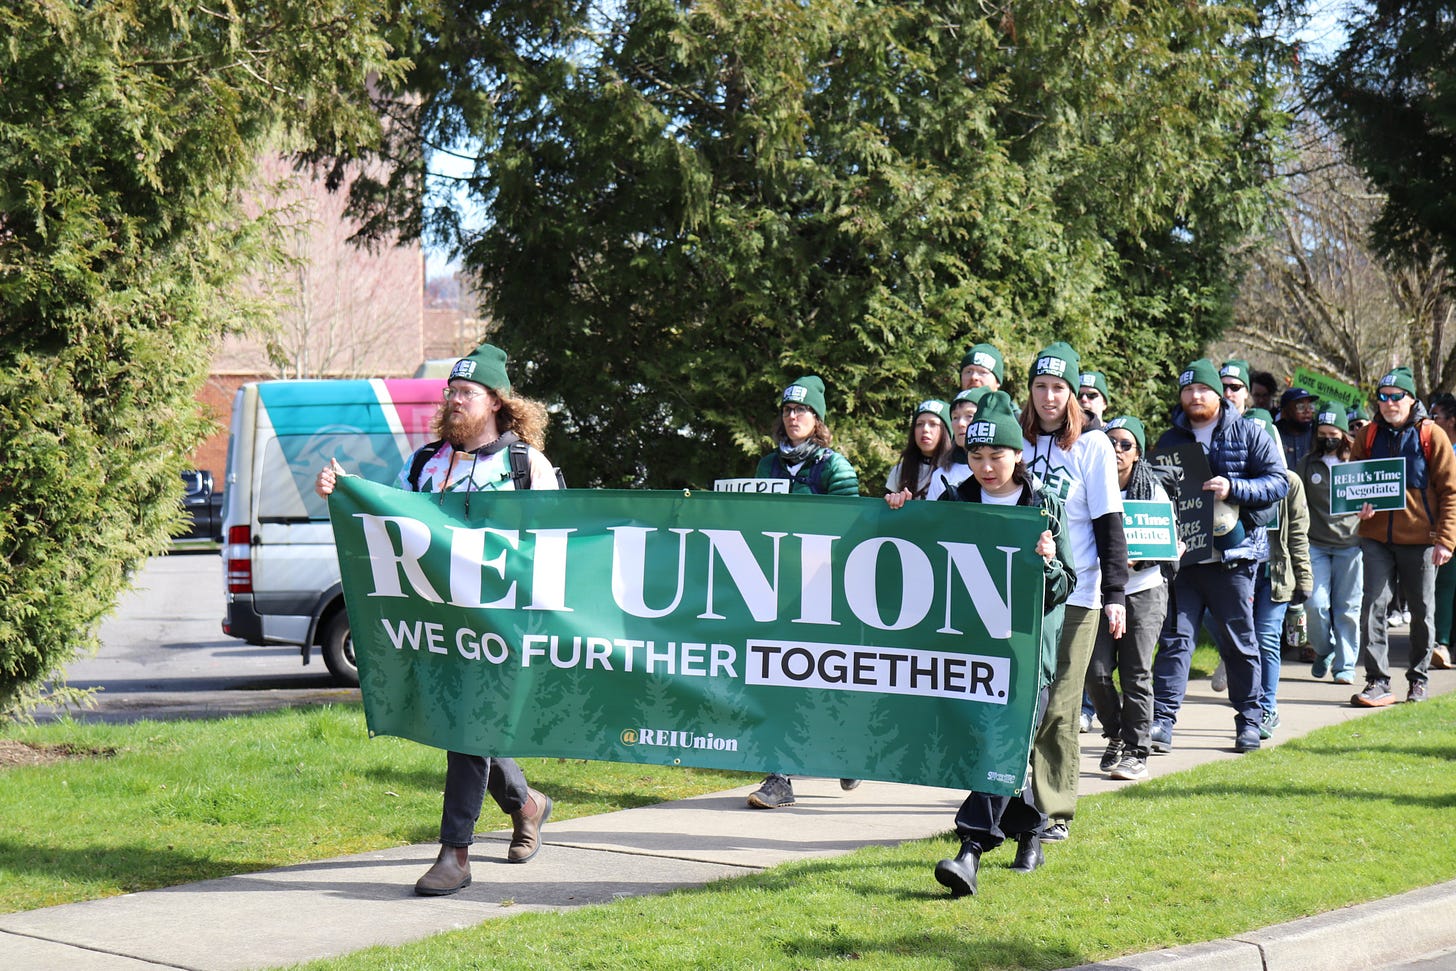 REI Union workers from across the country led the march to REI Headquarters in Issaquah Washington. At the front of the march workers display their union banner, "REI UNION, We Go Further TOGETHER."